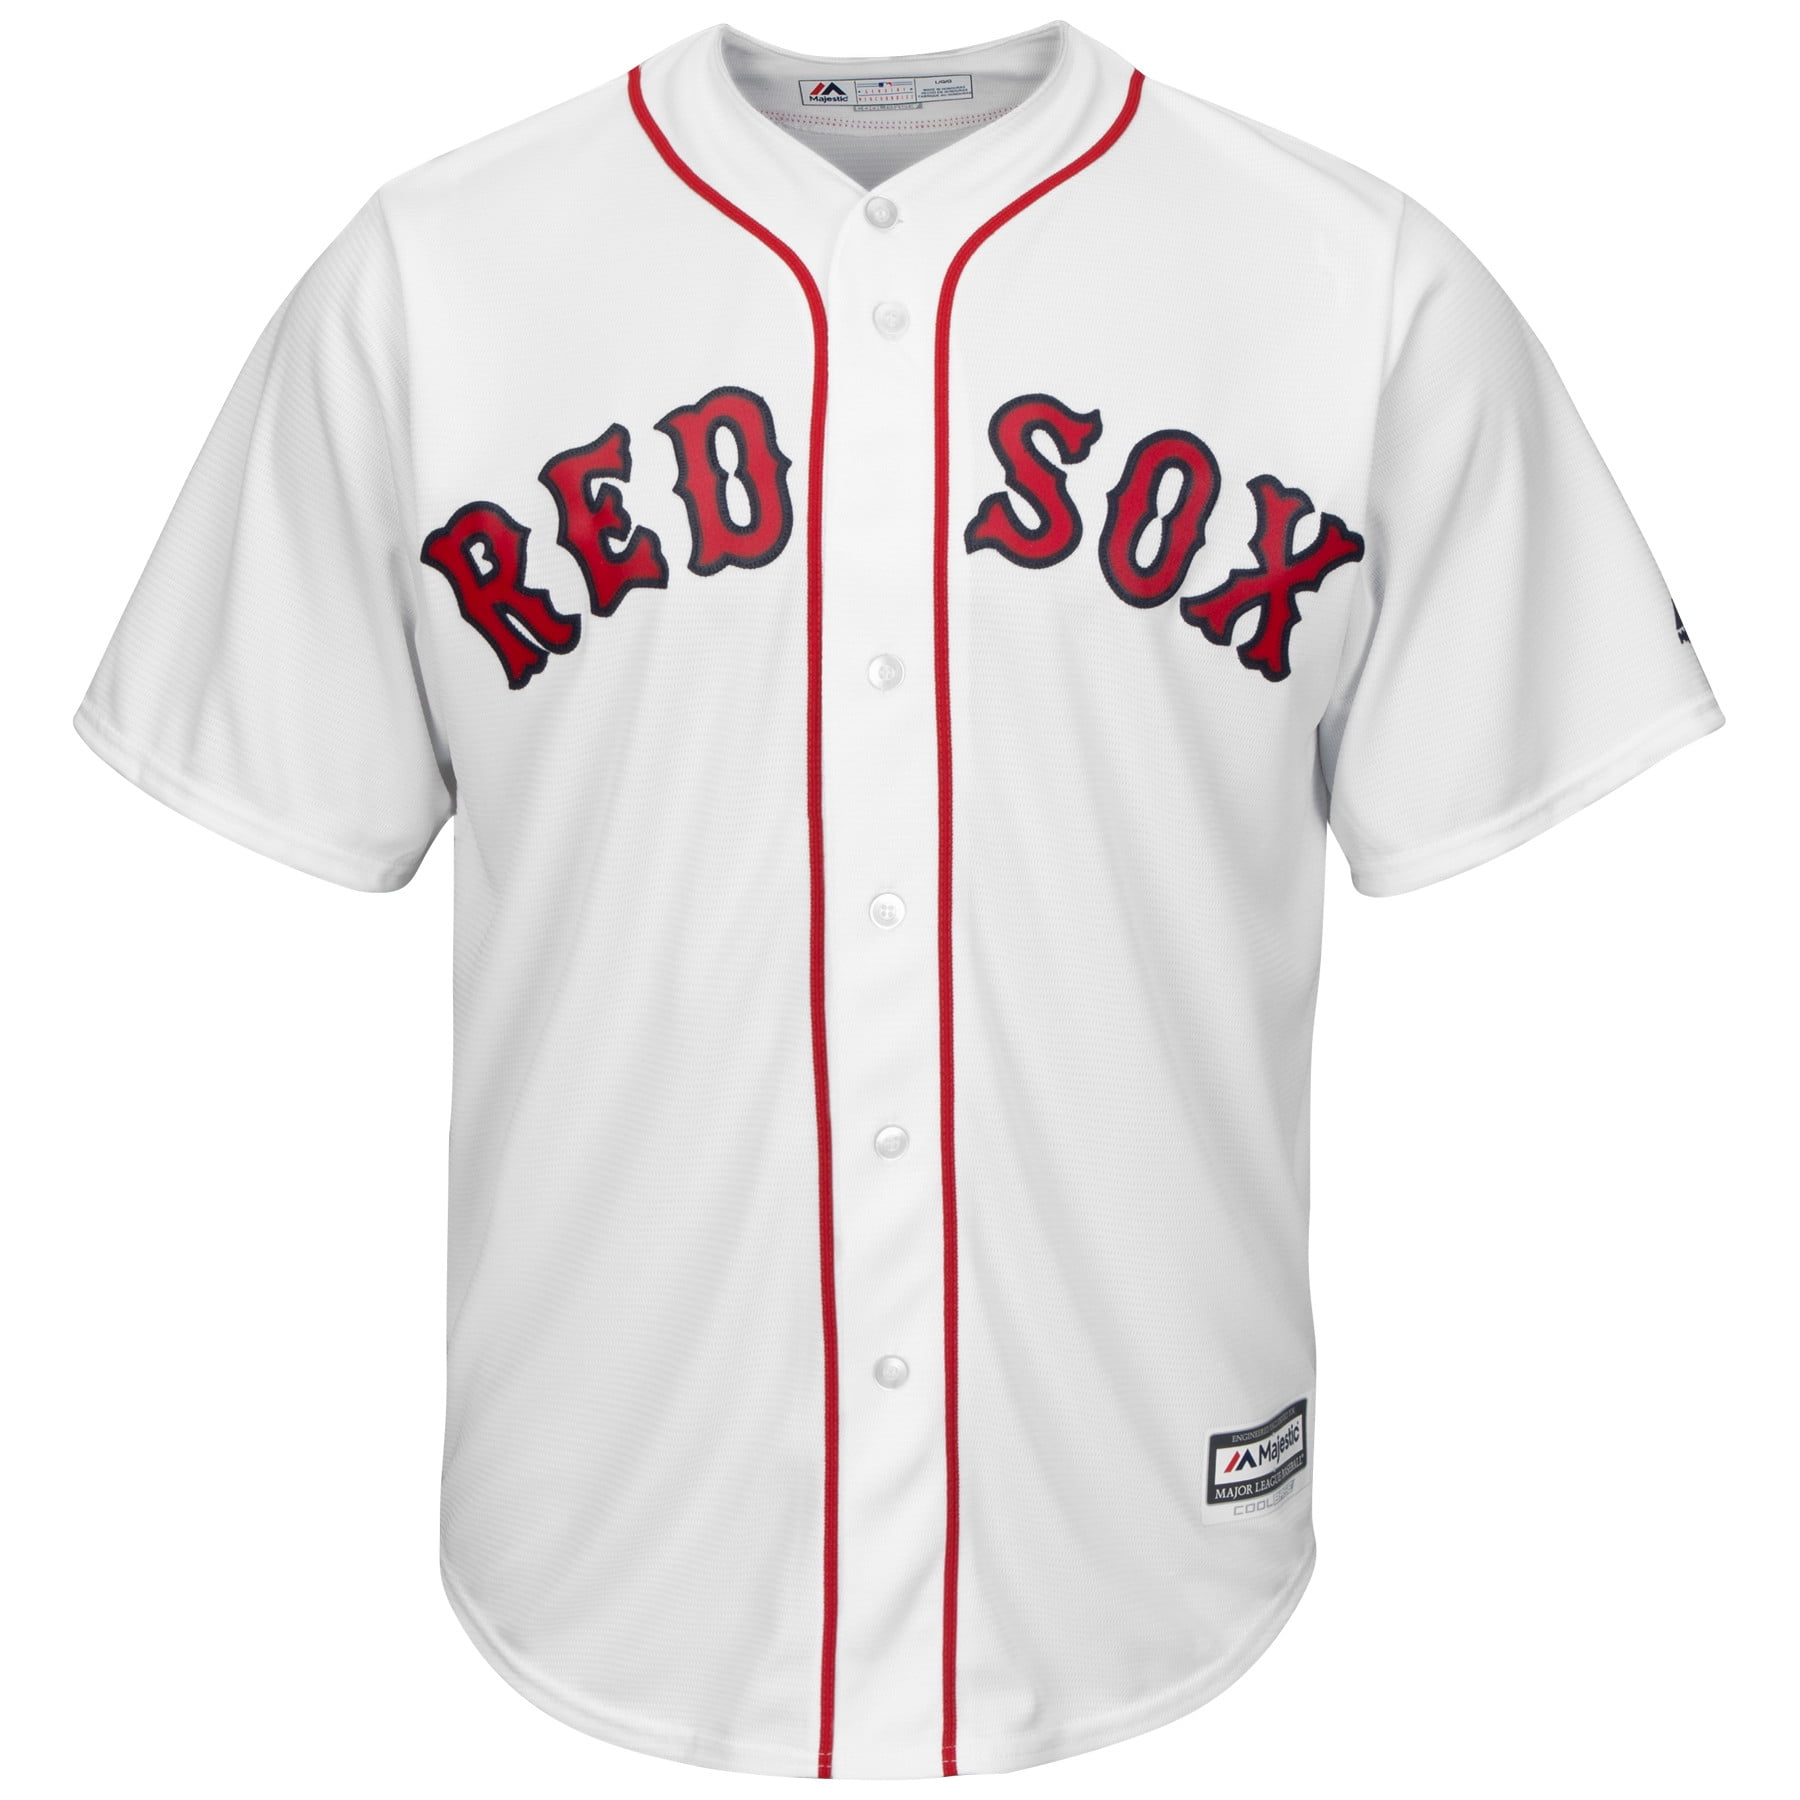 Men's Boston Red Sox Majestic Gray Road Cool Base Team Jersey